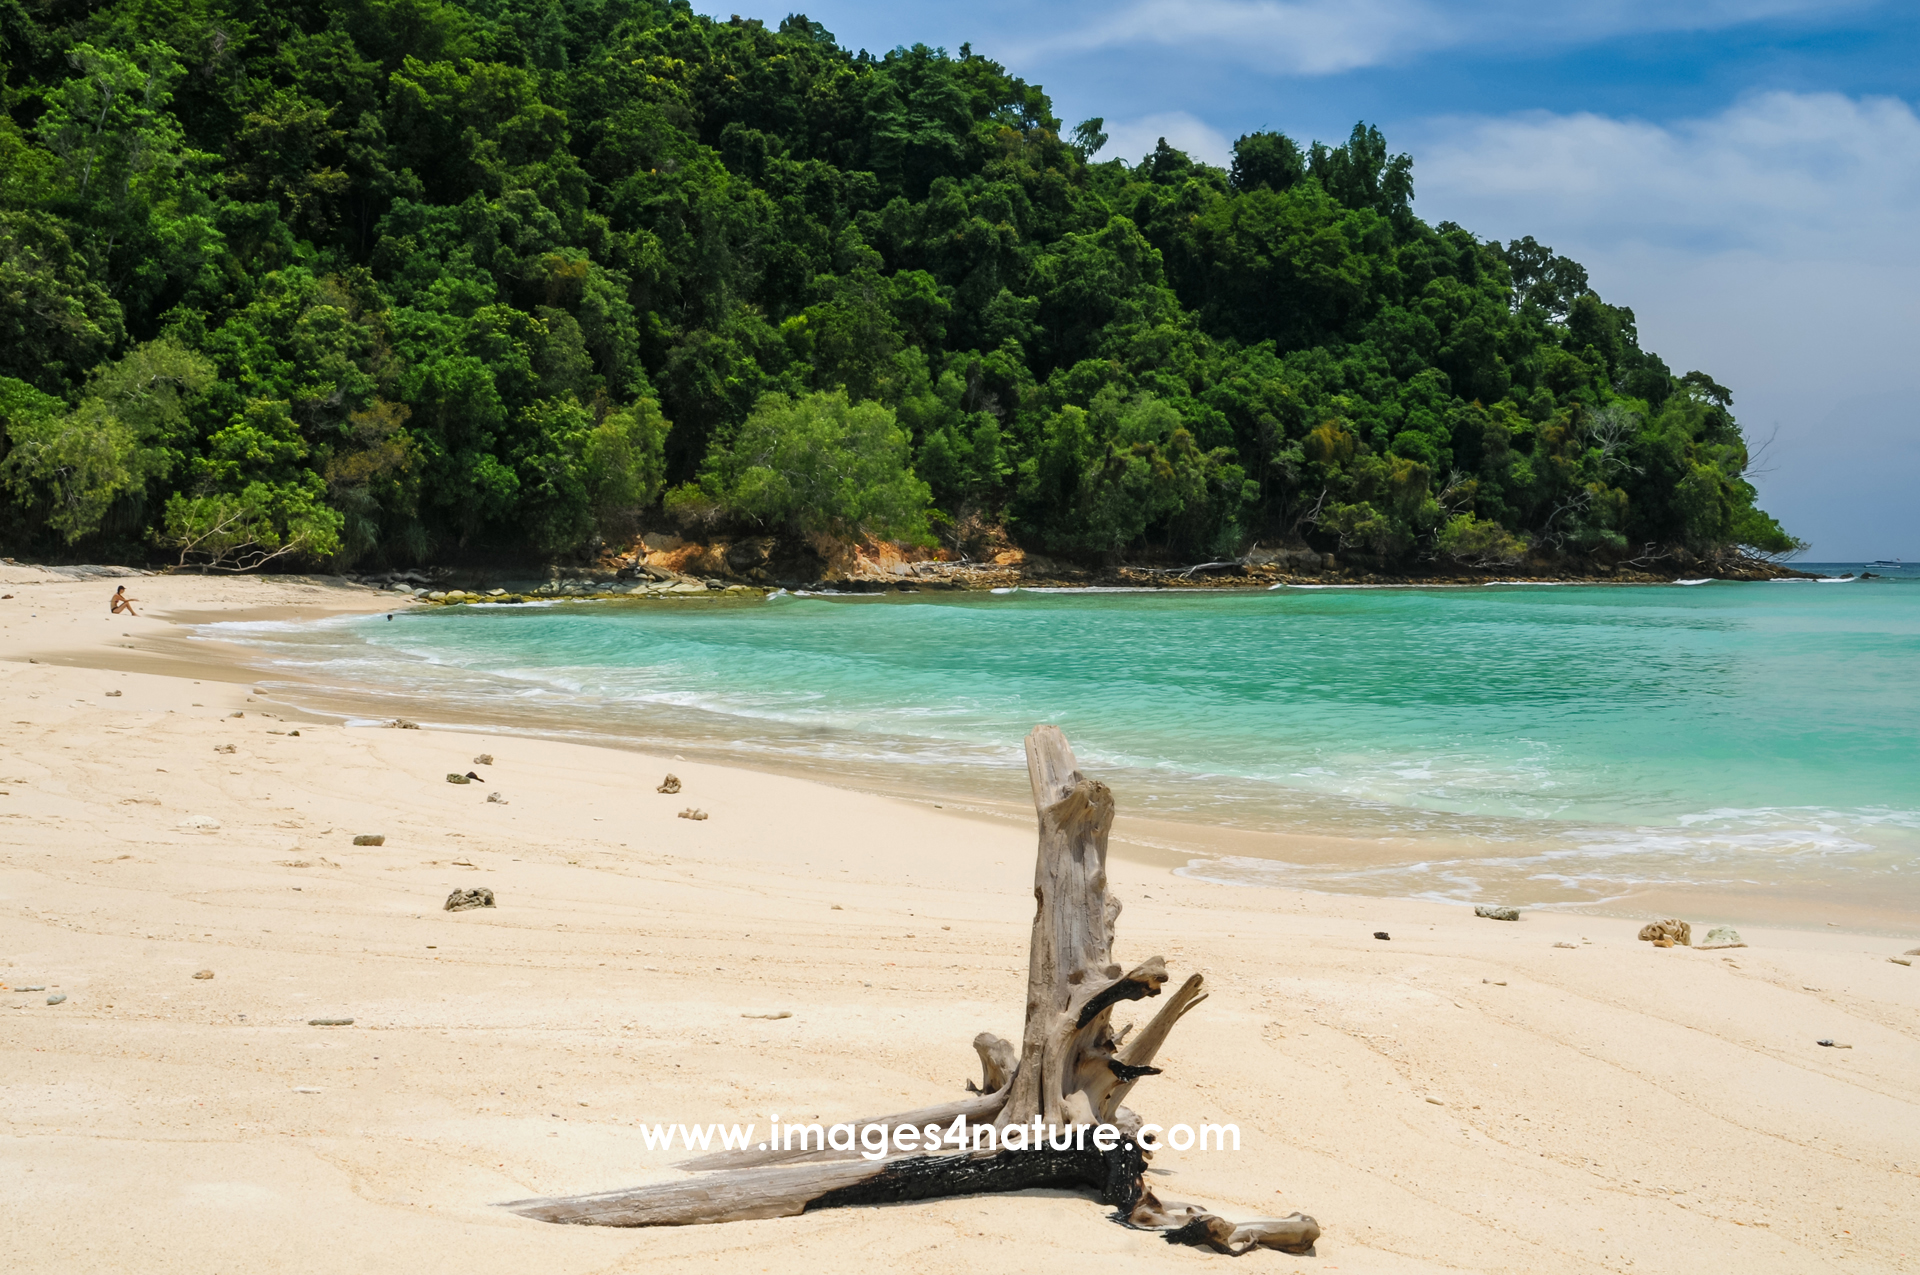 Sandy Malaysian island beach with tropical forest and tree trunk